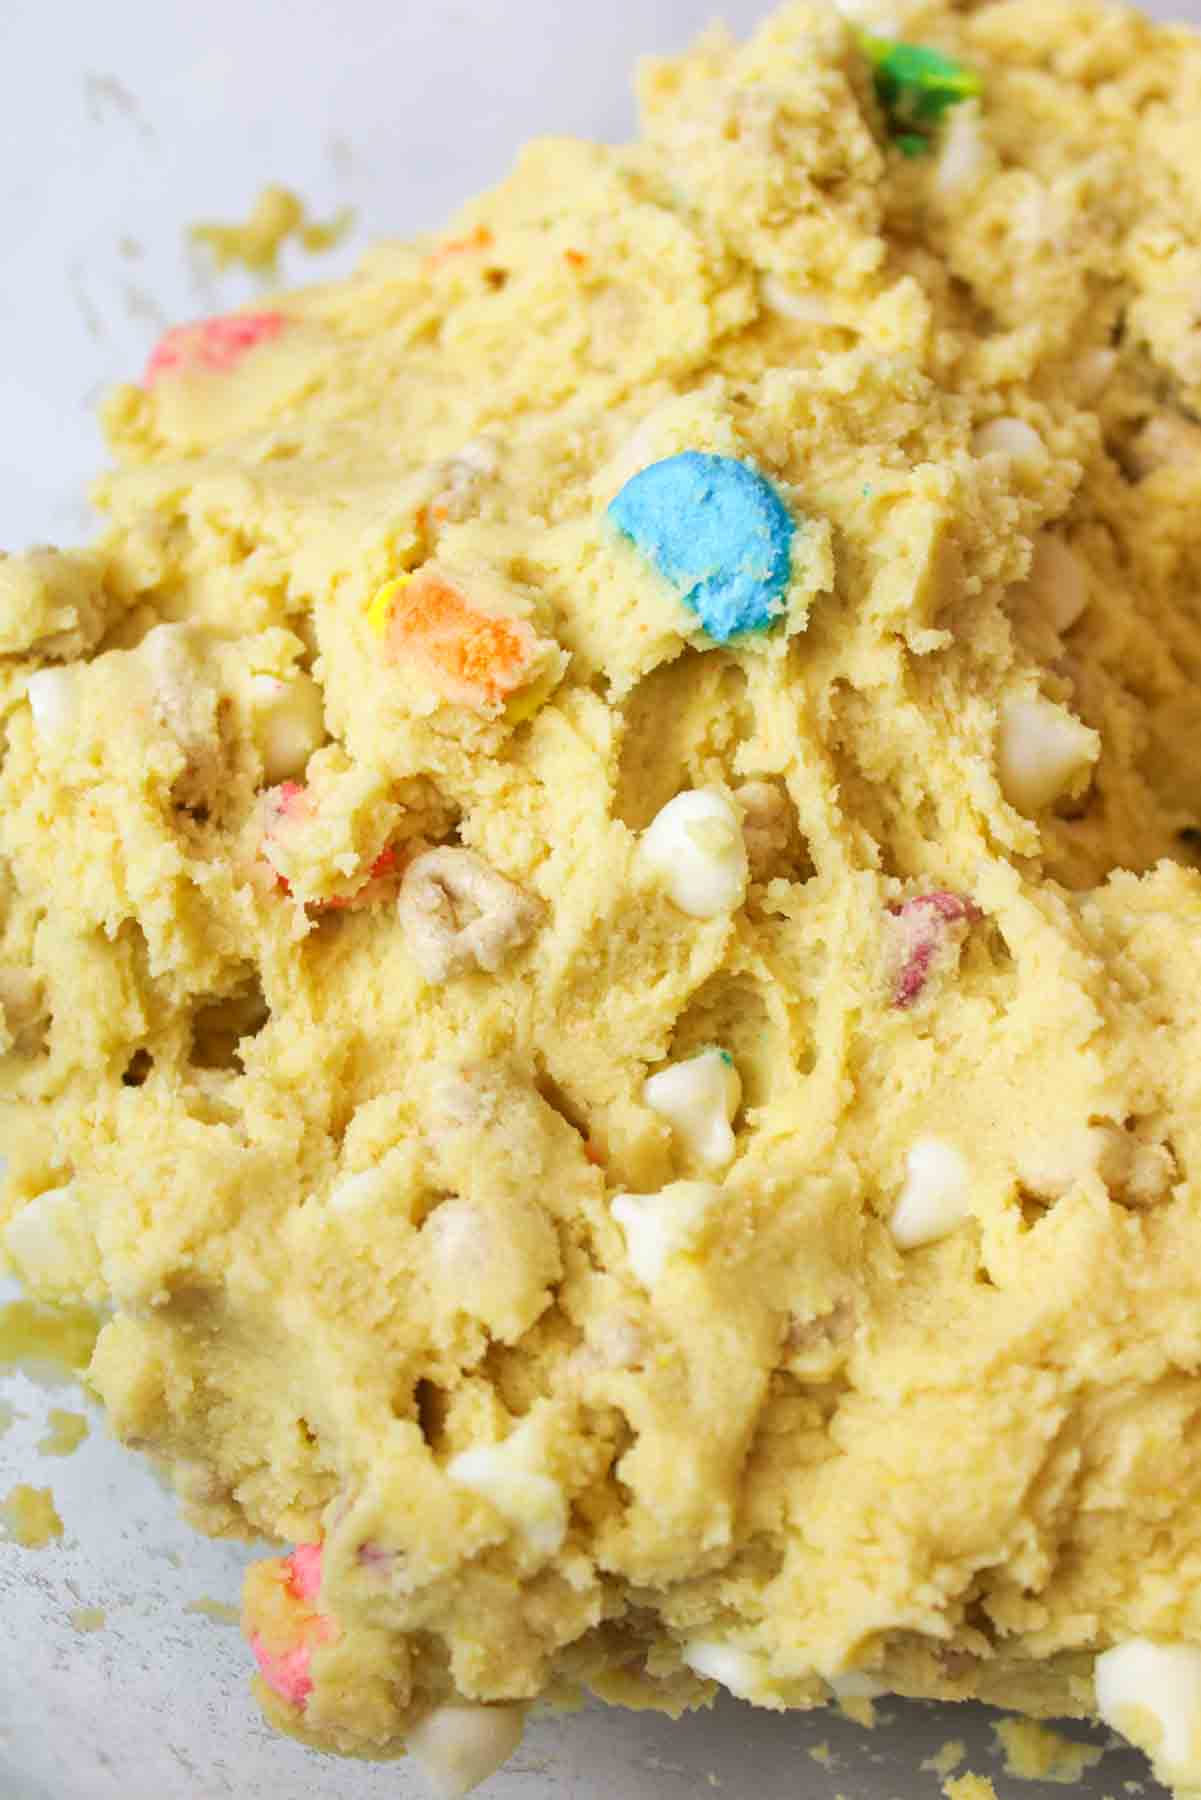 a close up of cookie dough with lucky charms and white chocolate chips inside of it